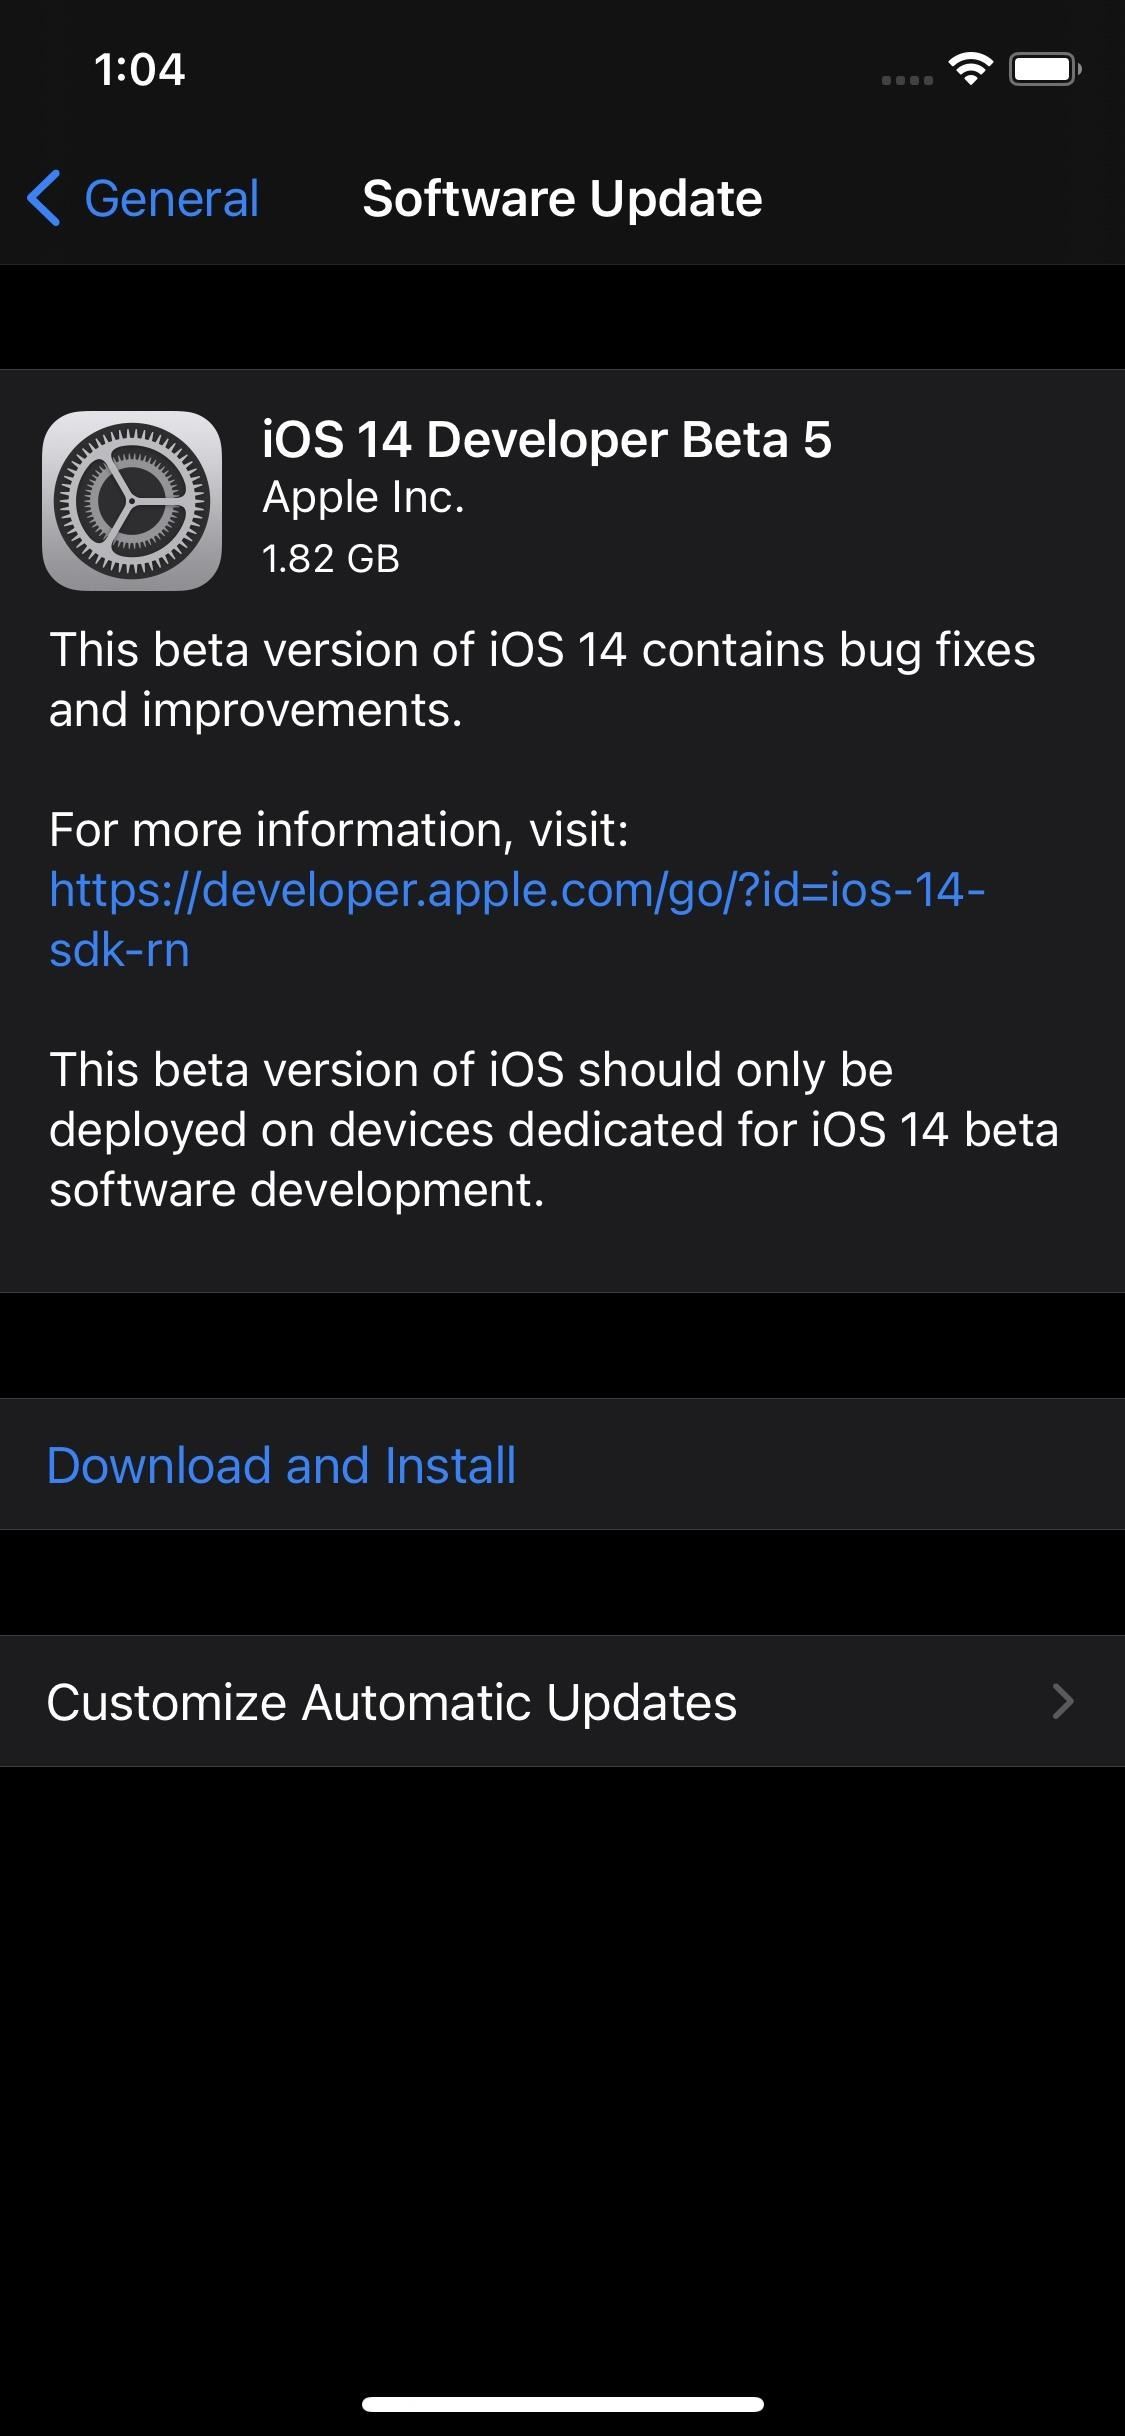 Apple Releases iOS 14 Developer Beta 5 for iPhone, Includes Widget-Specific Location Settings